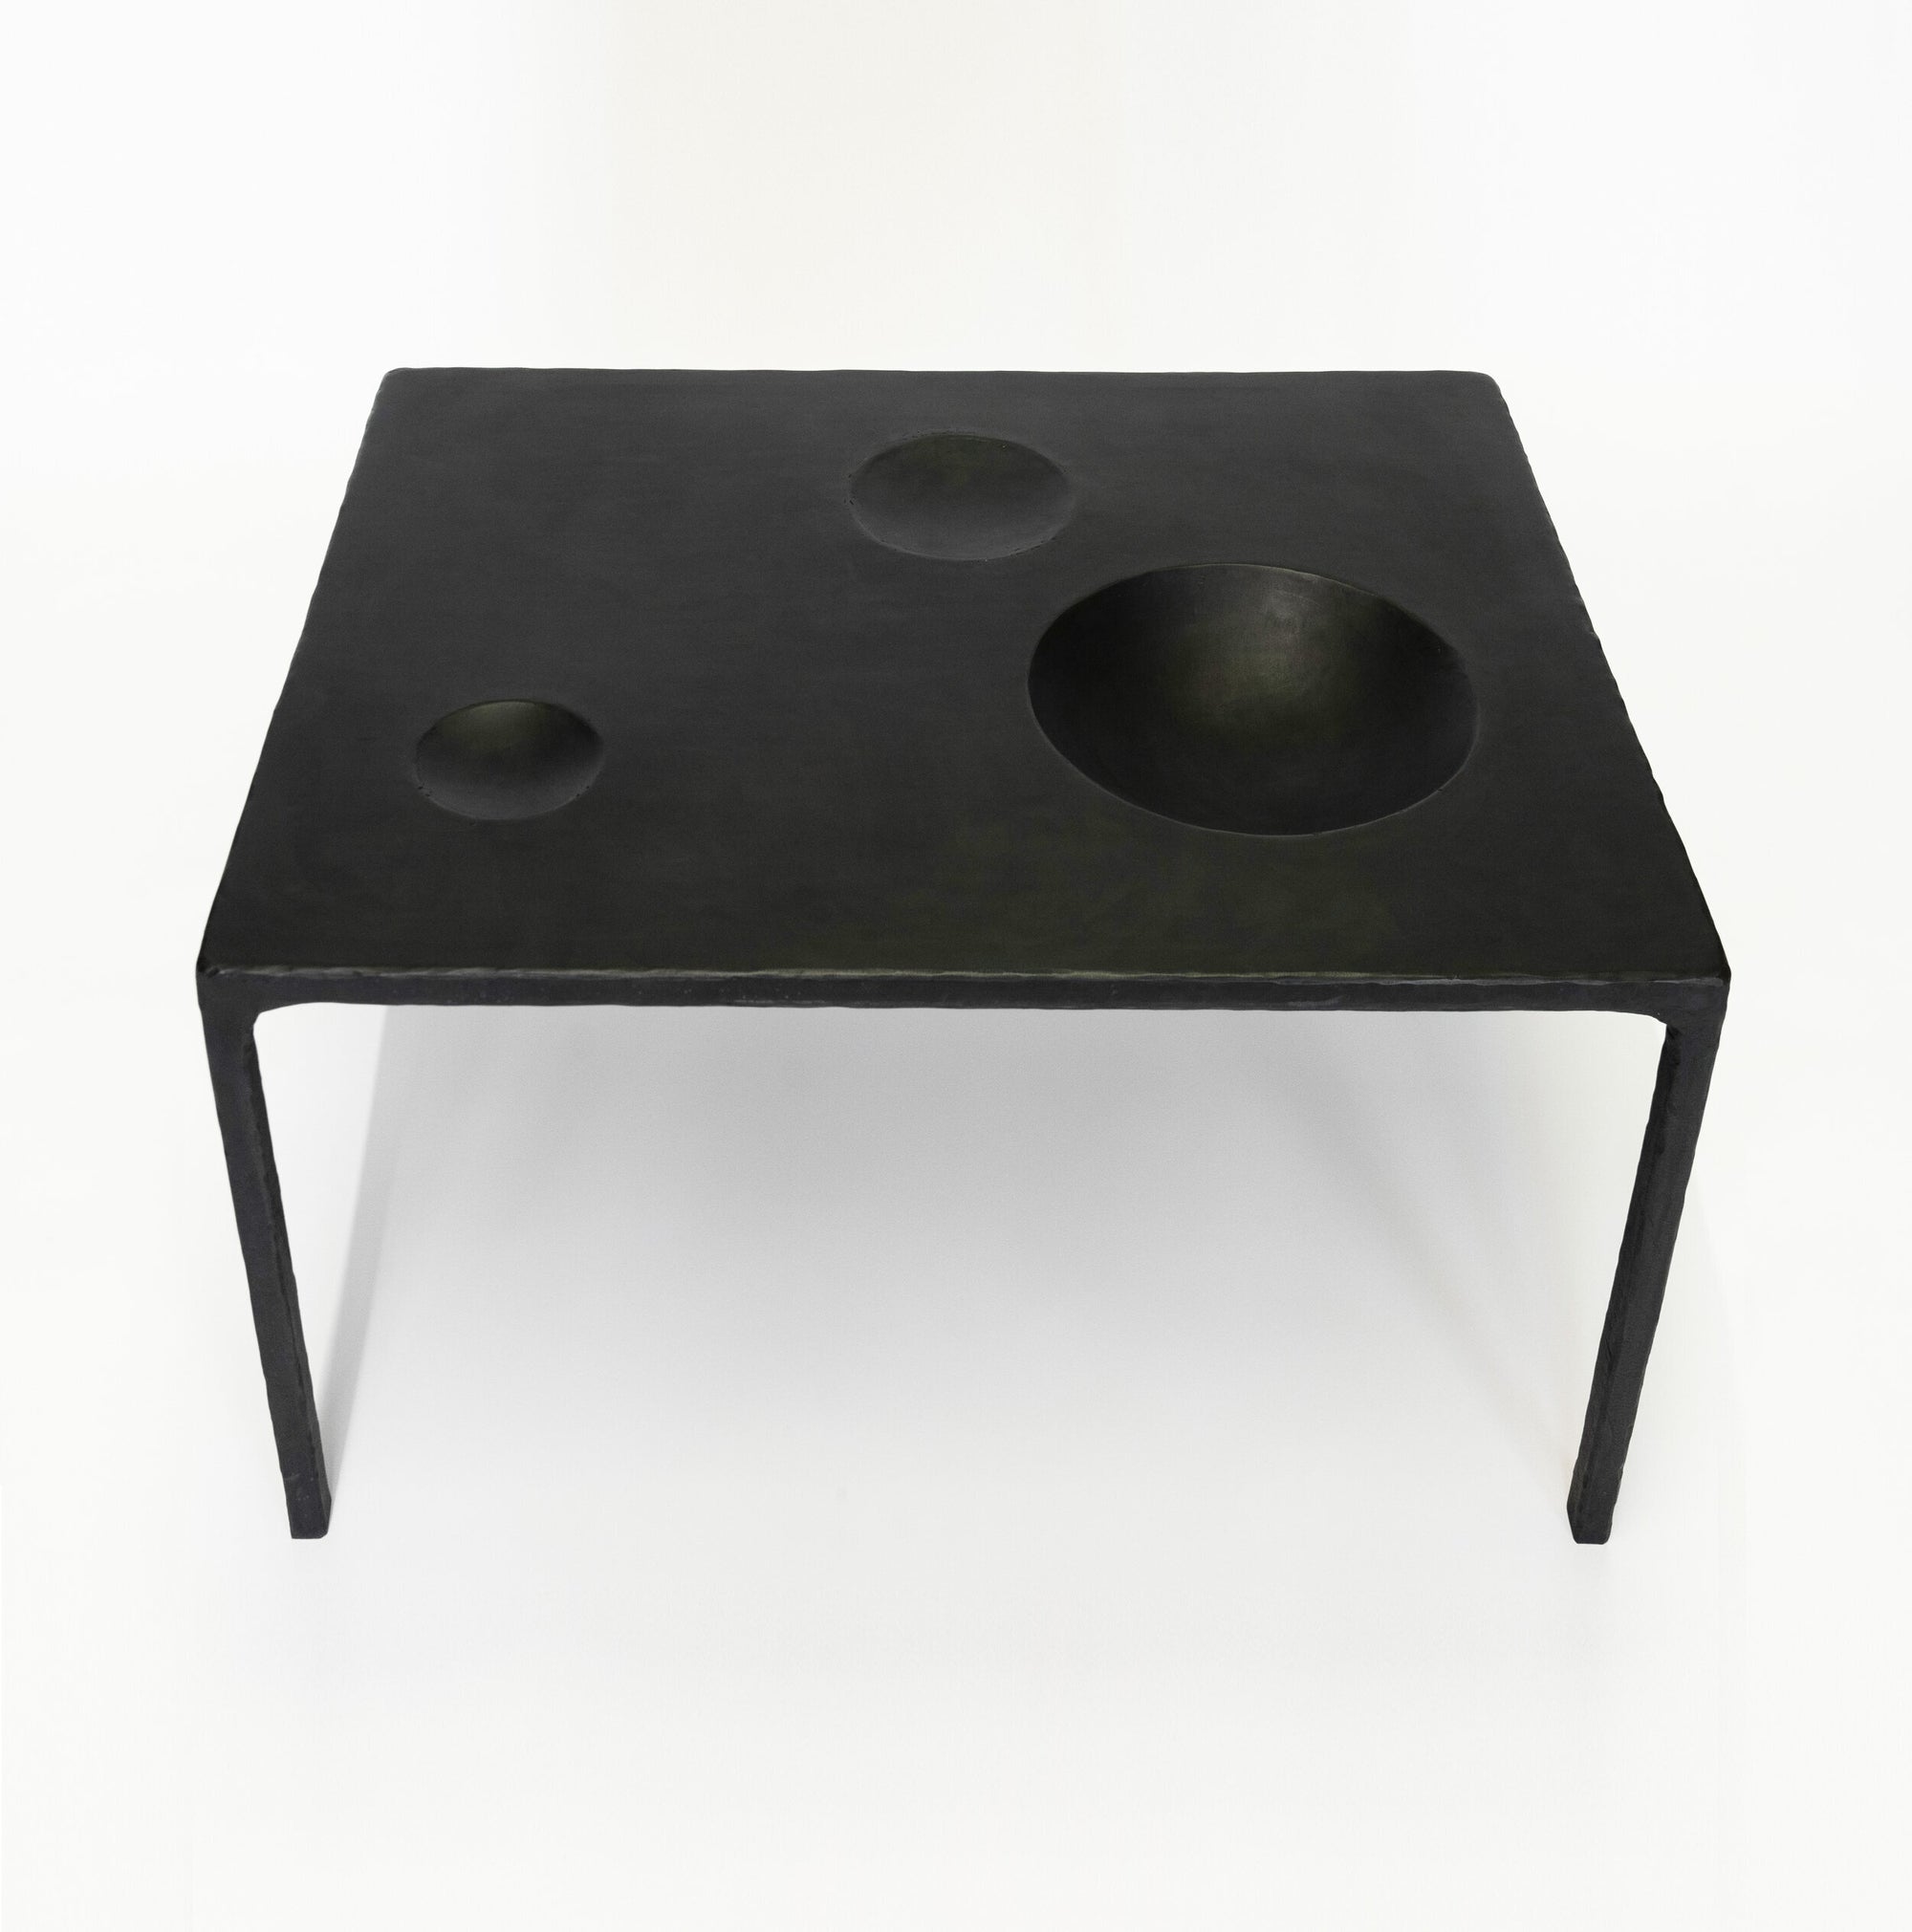 TABLE NO. 11 - SIDE TABLE